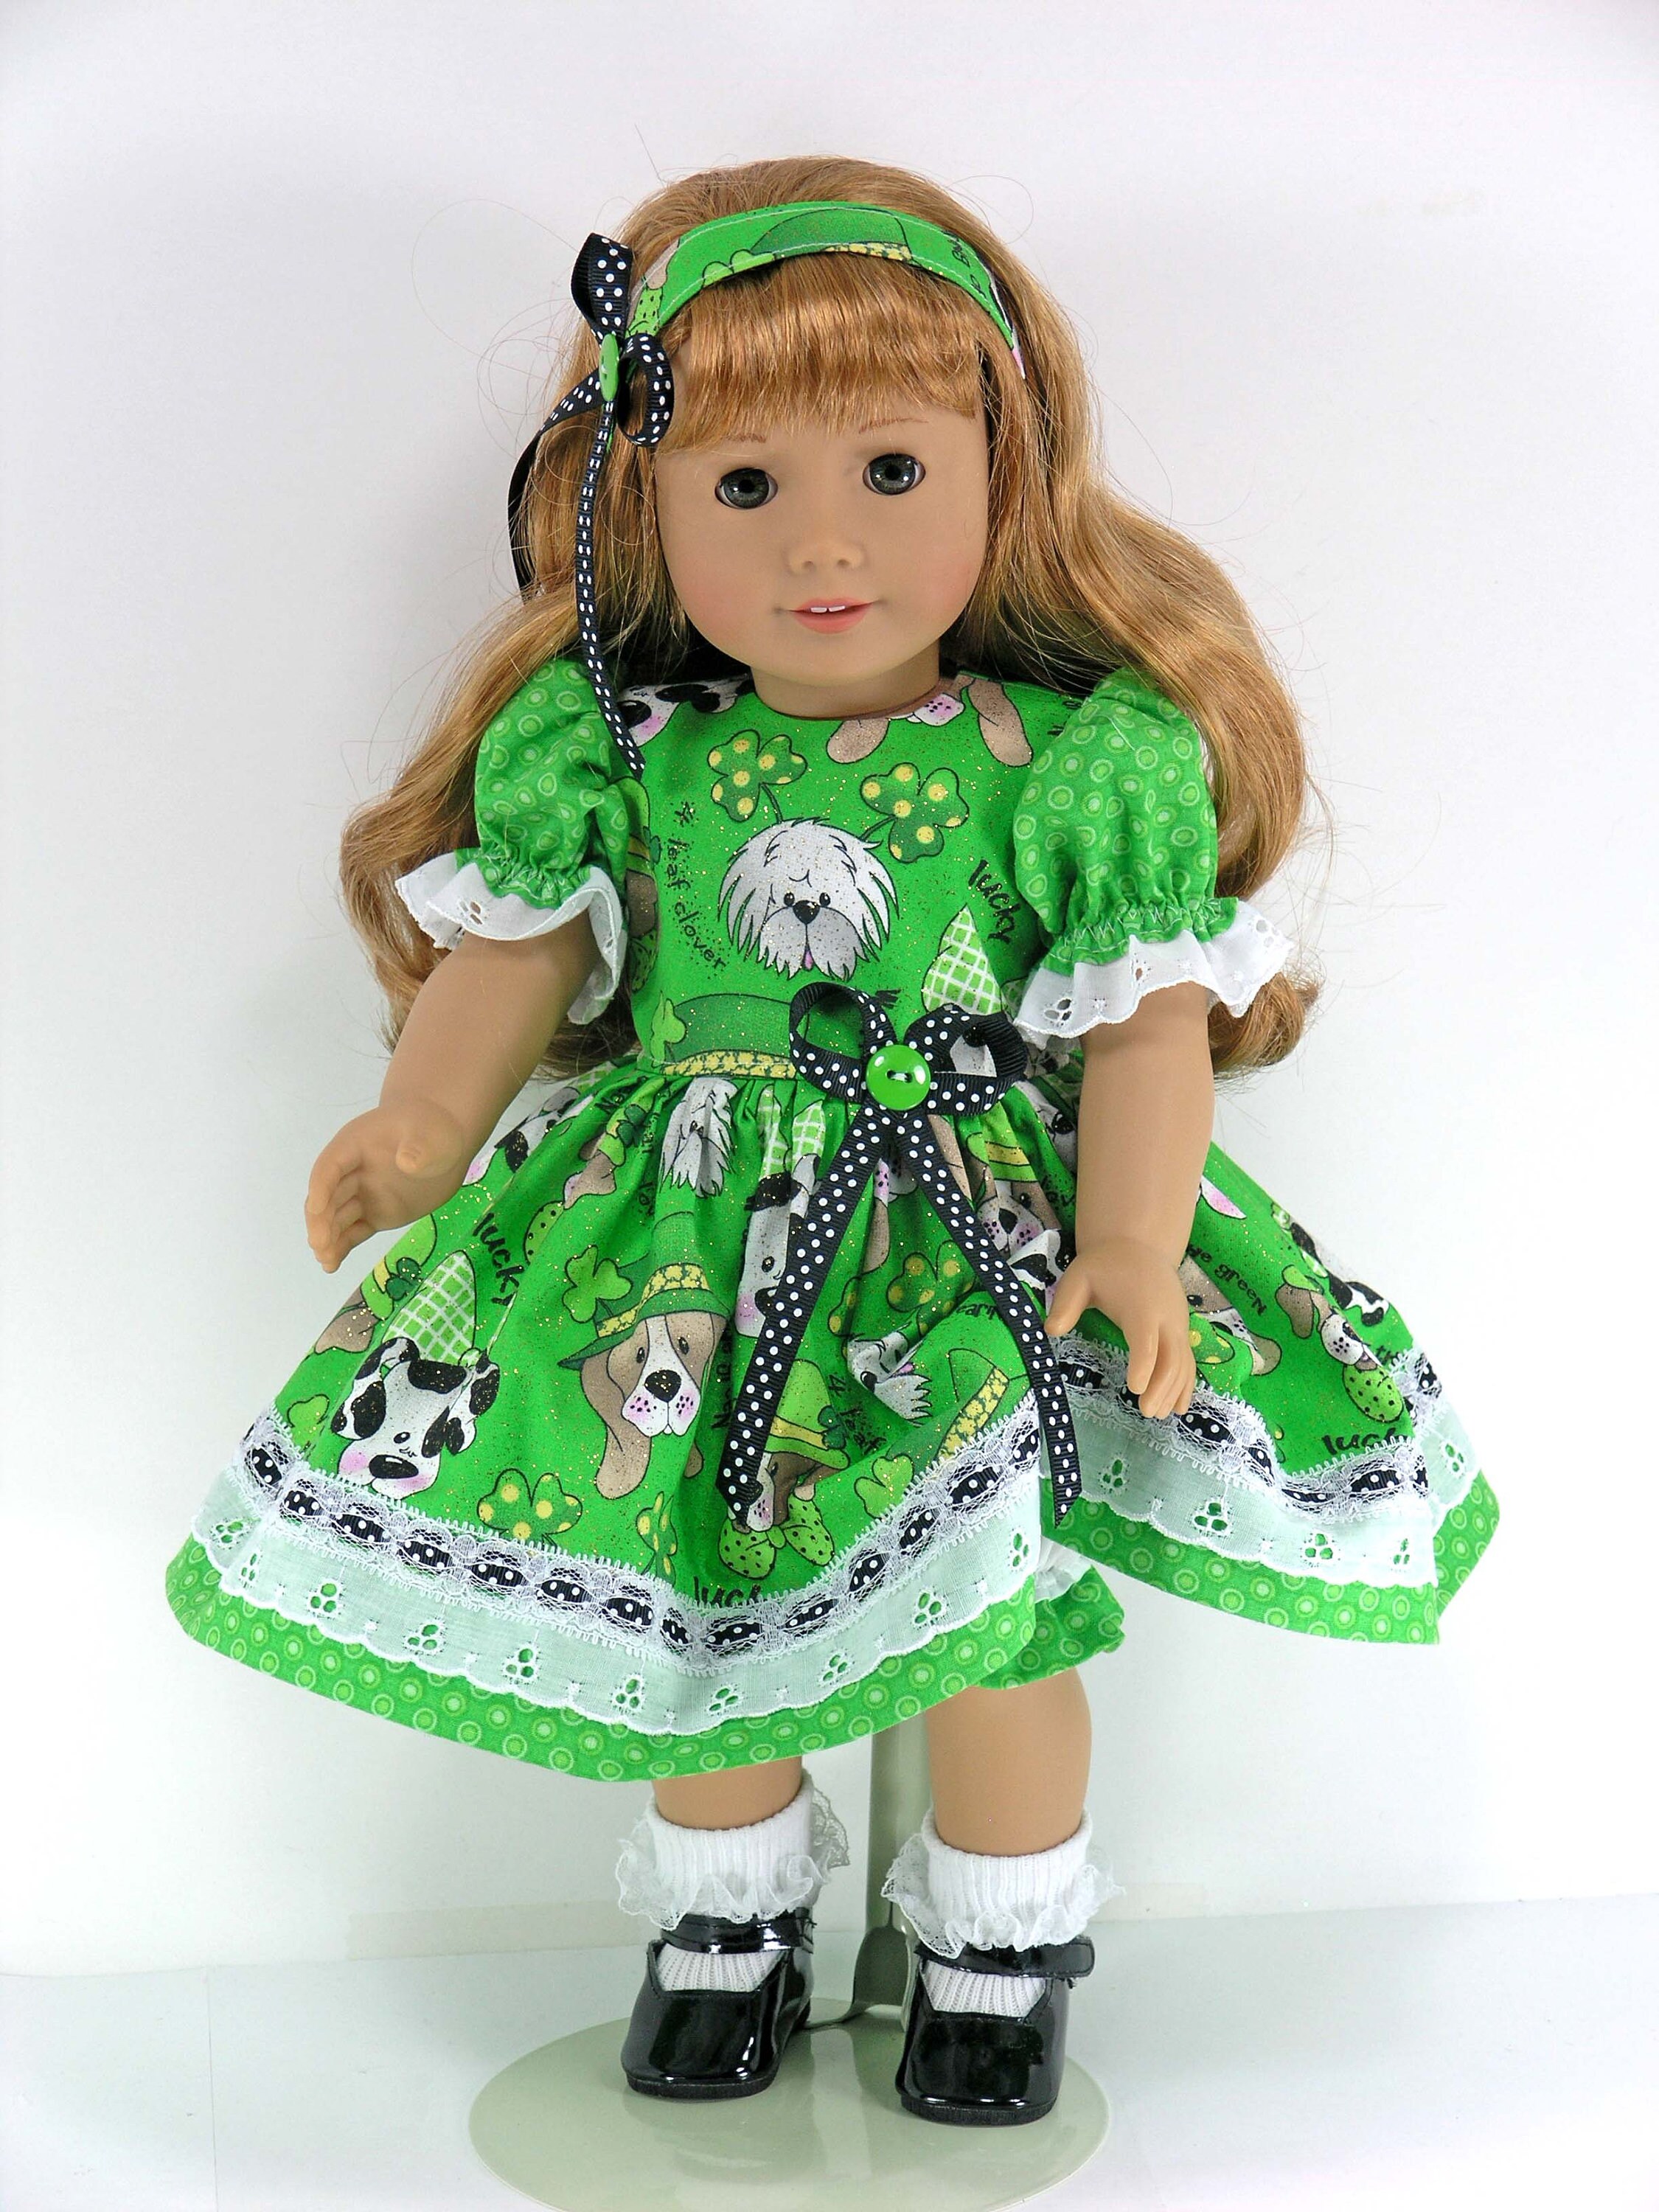 Hot Madame Handmade fashion Doll Clothes dress For 18 inch  Girl DolRD 